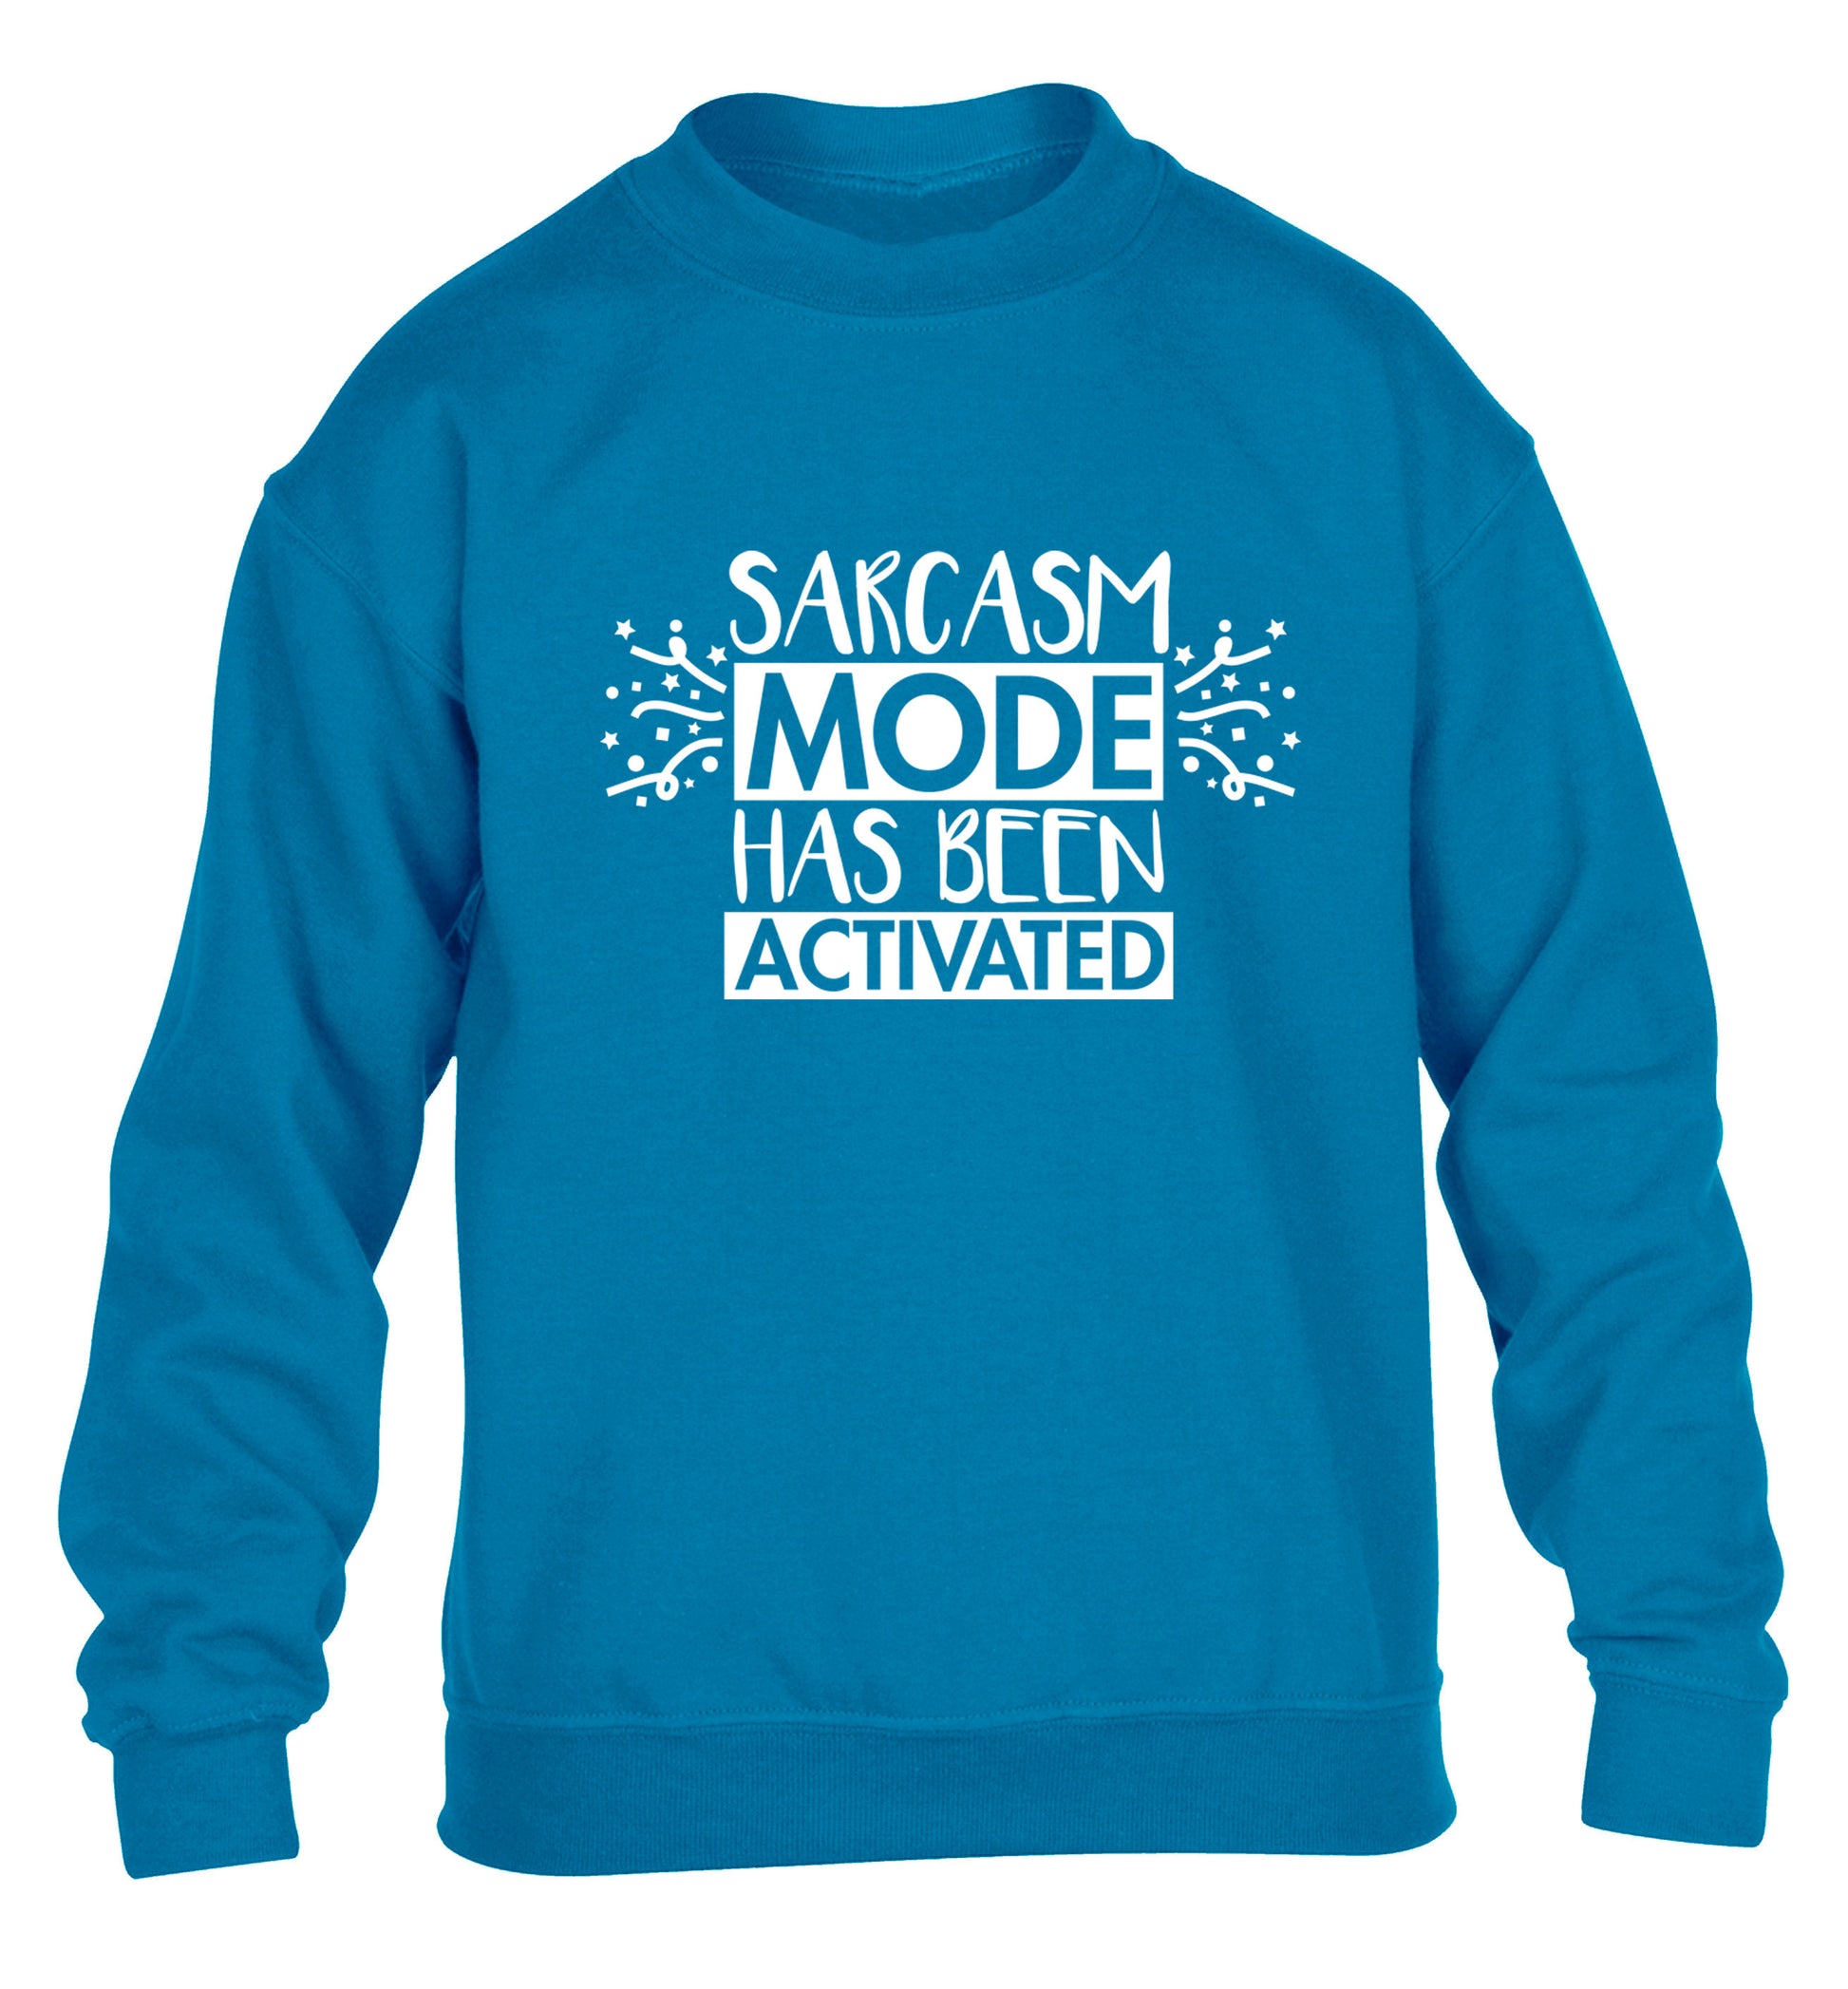 Sarcarsm mode has been activated children's blue sweater 12-14 Years